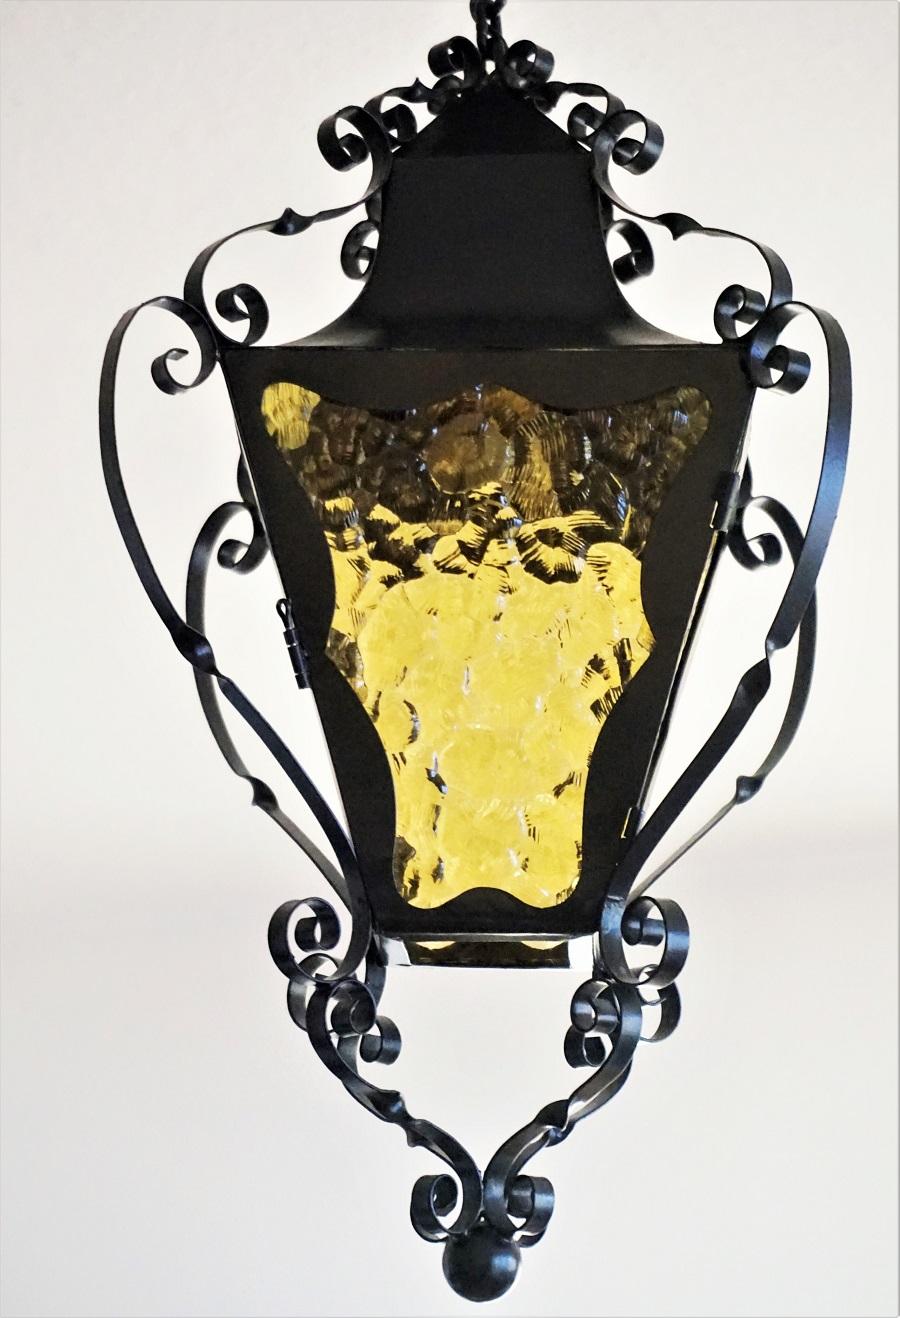 A four-sided Arts & Crafts wrought iron lantern with yellow glass panels for indoor and outdoor use, France, 1920-1930. Brass and porcelain E27 light socket for a large sized bulb up to 100watt. One side can be opened as a door for bulb change. In